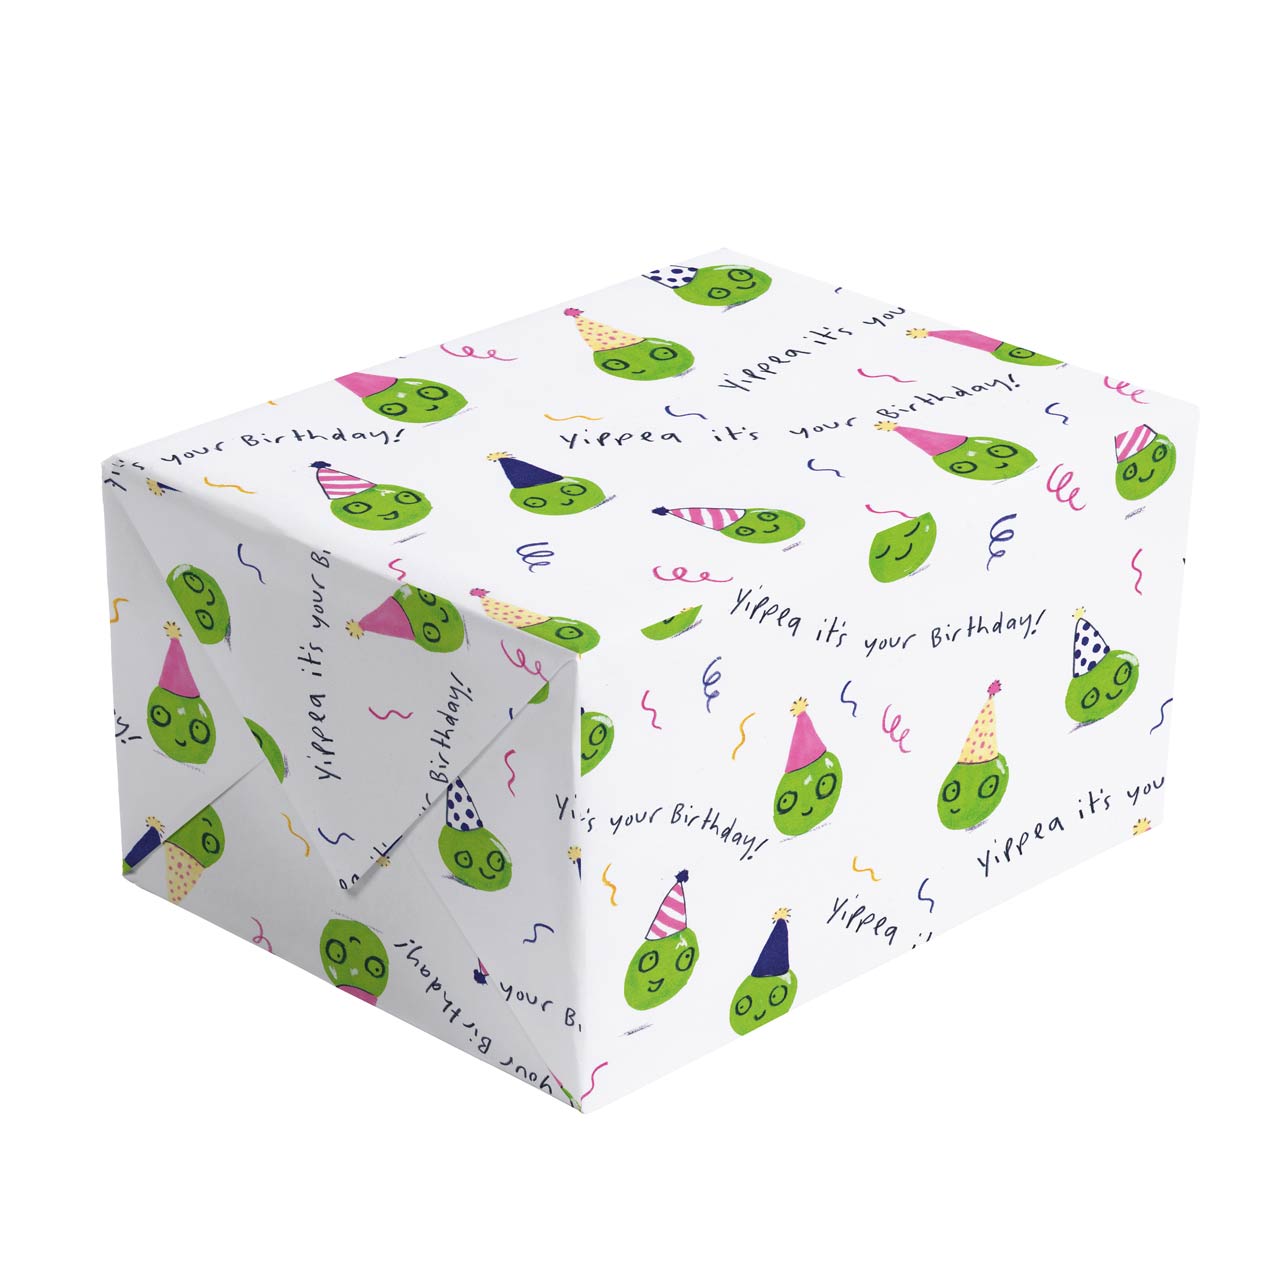 Yippea Birthday Gift Wrapping Paper - Folded Single Sheet